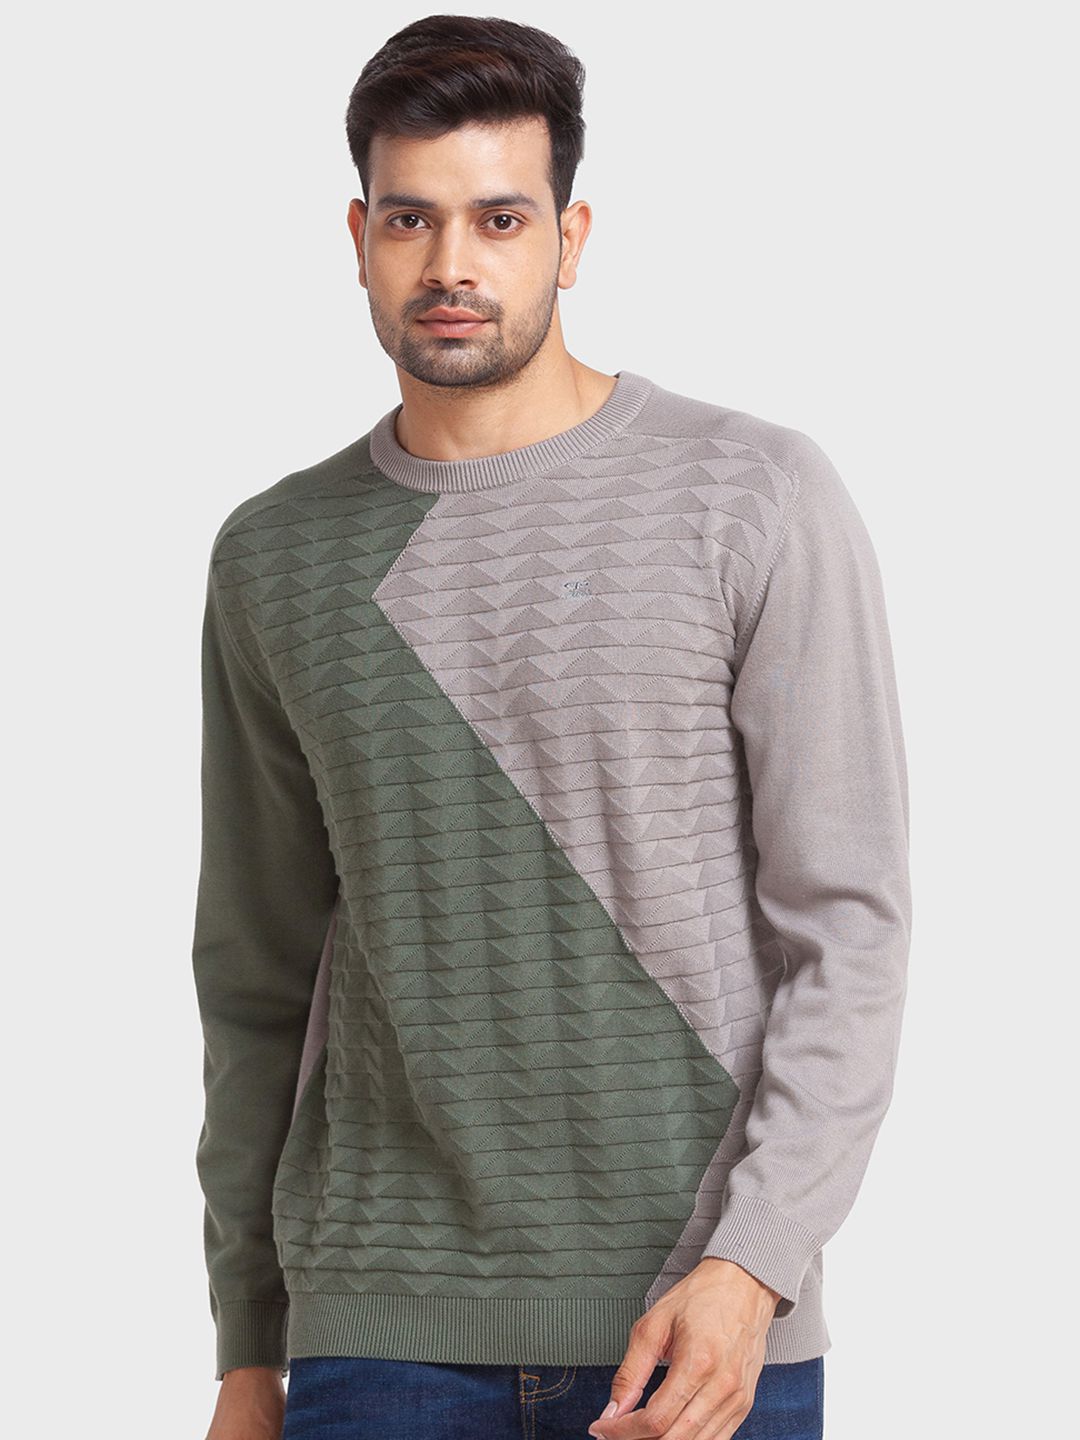     			Colorplus Cotton Round Neck Men's Full Sleeves Pullover Sweater - Green ( Pack of 1 )